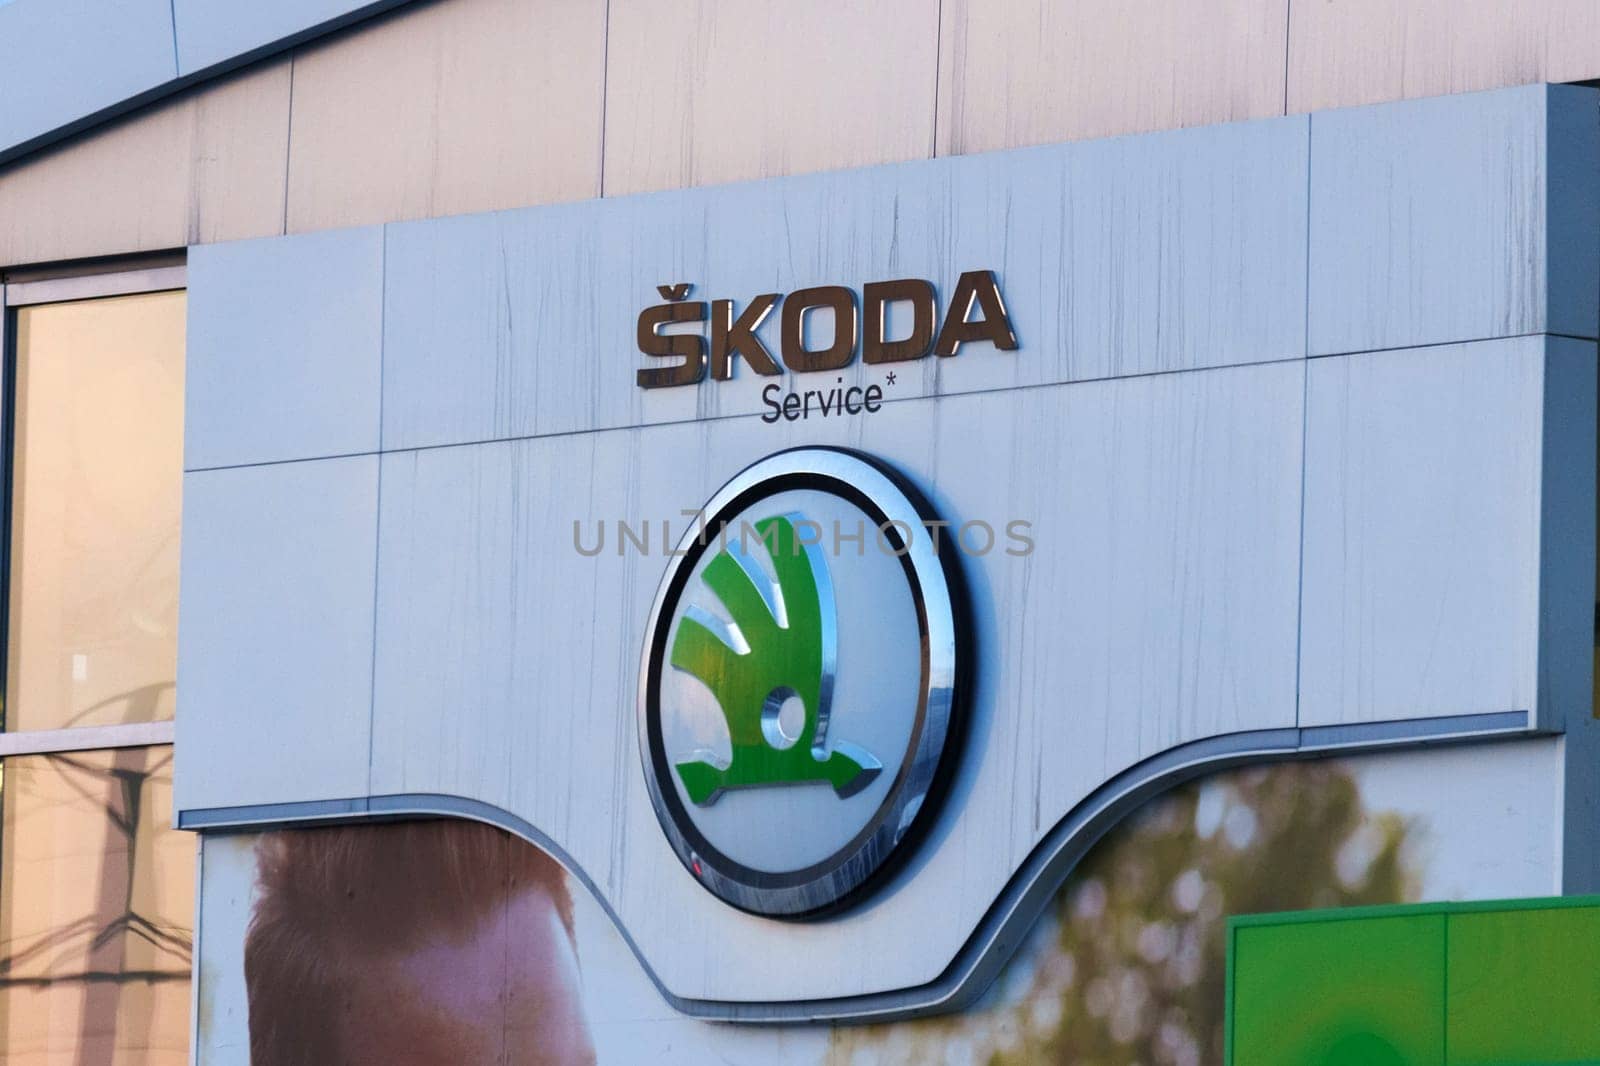 Tyumen, Russia-March 18, 2024: Skoda logo is displayed prominently in front of a commercial building, in Skoda vehicles.